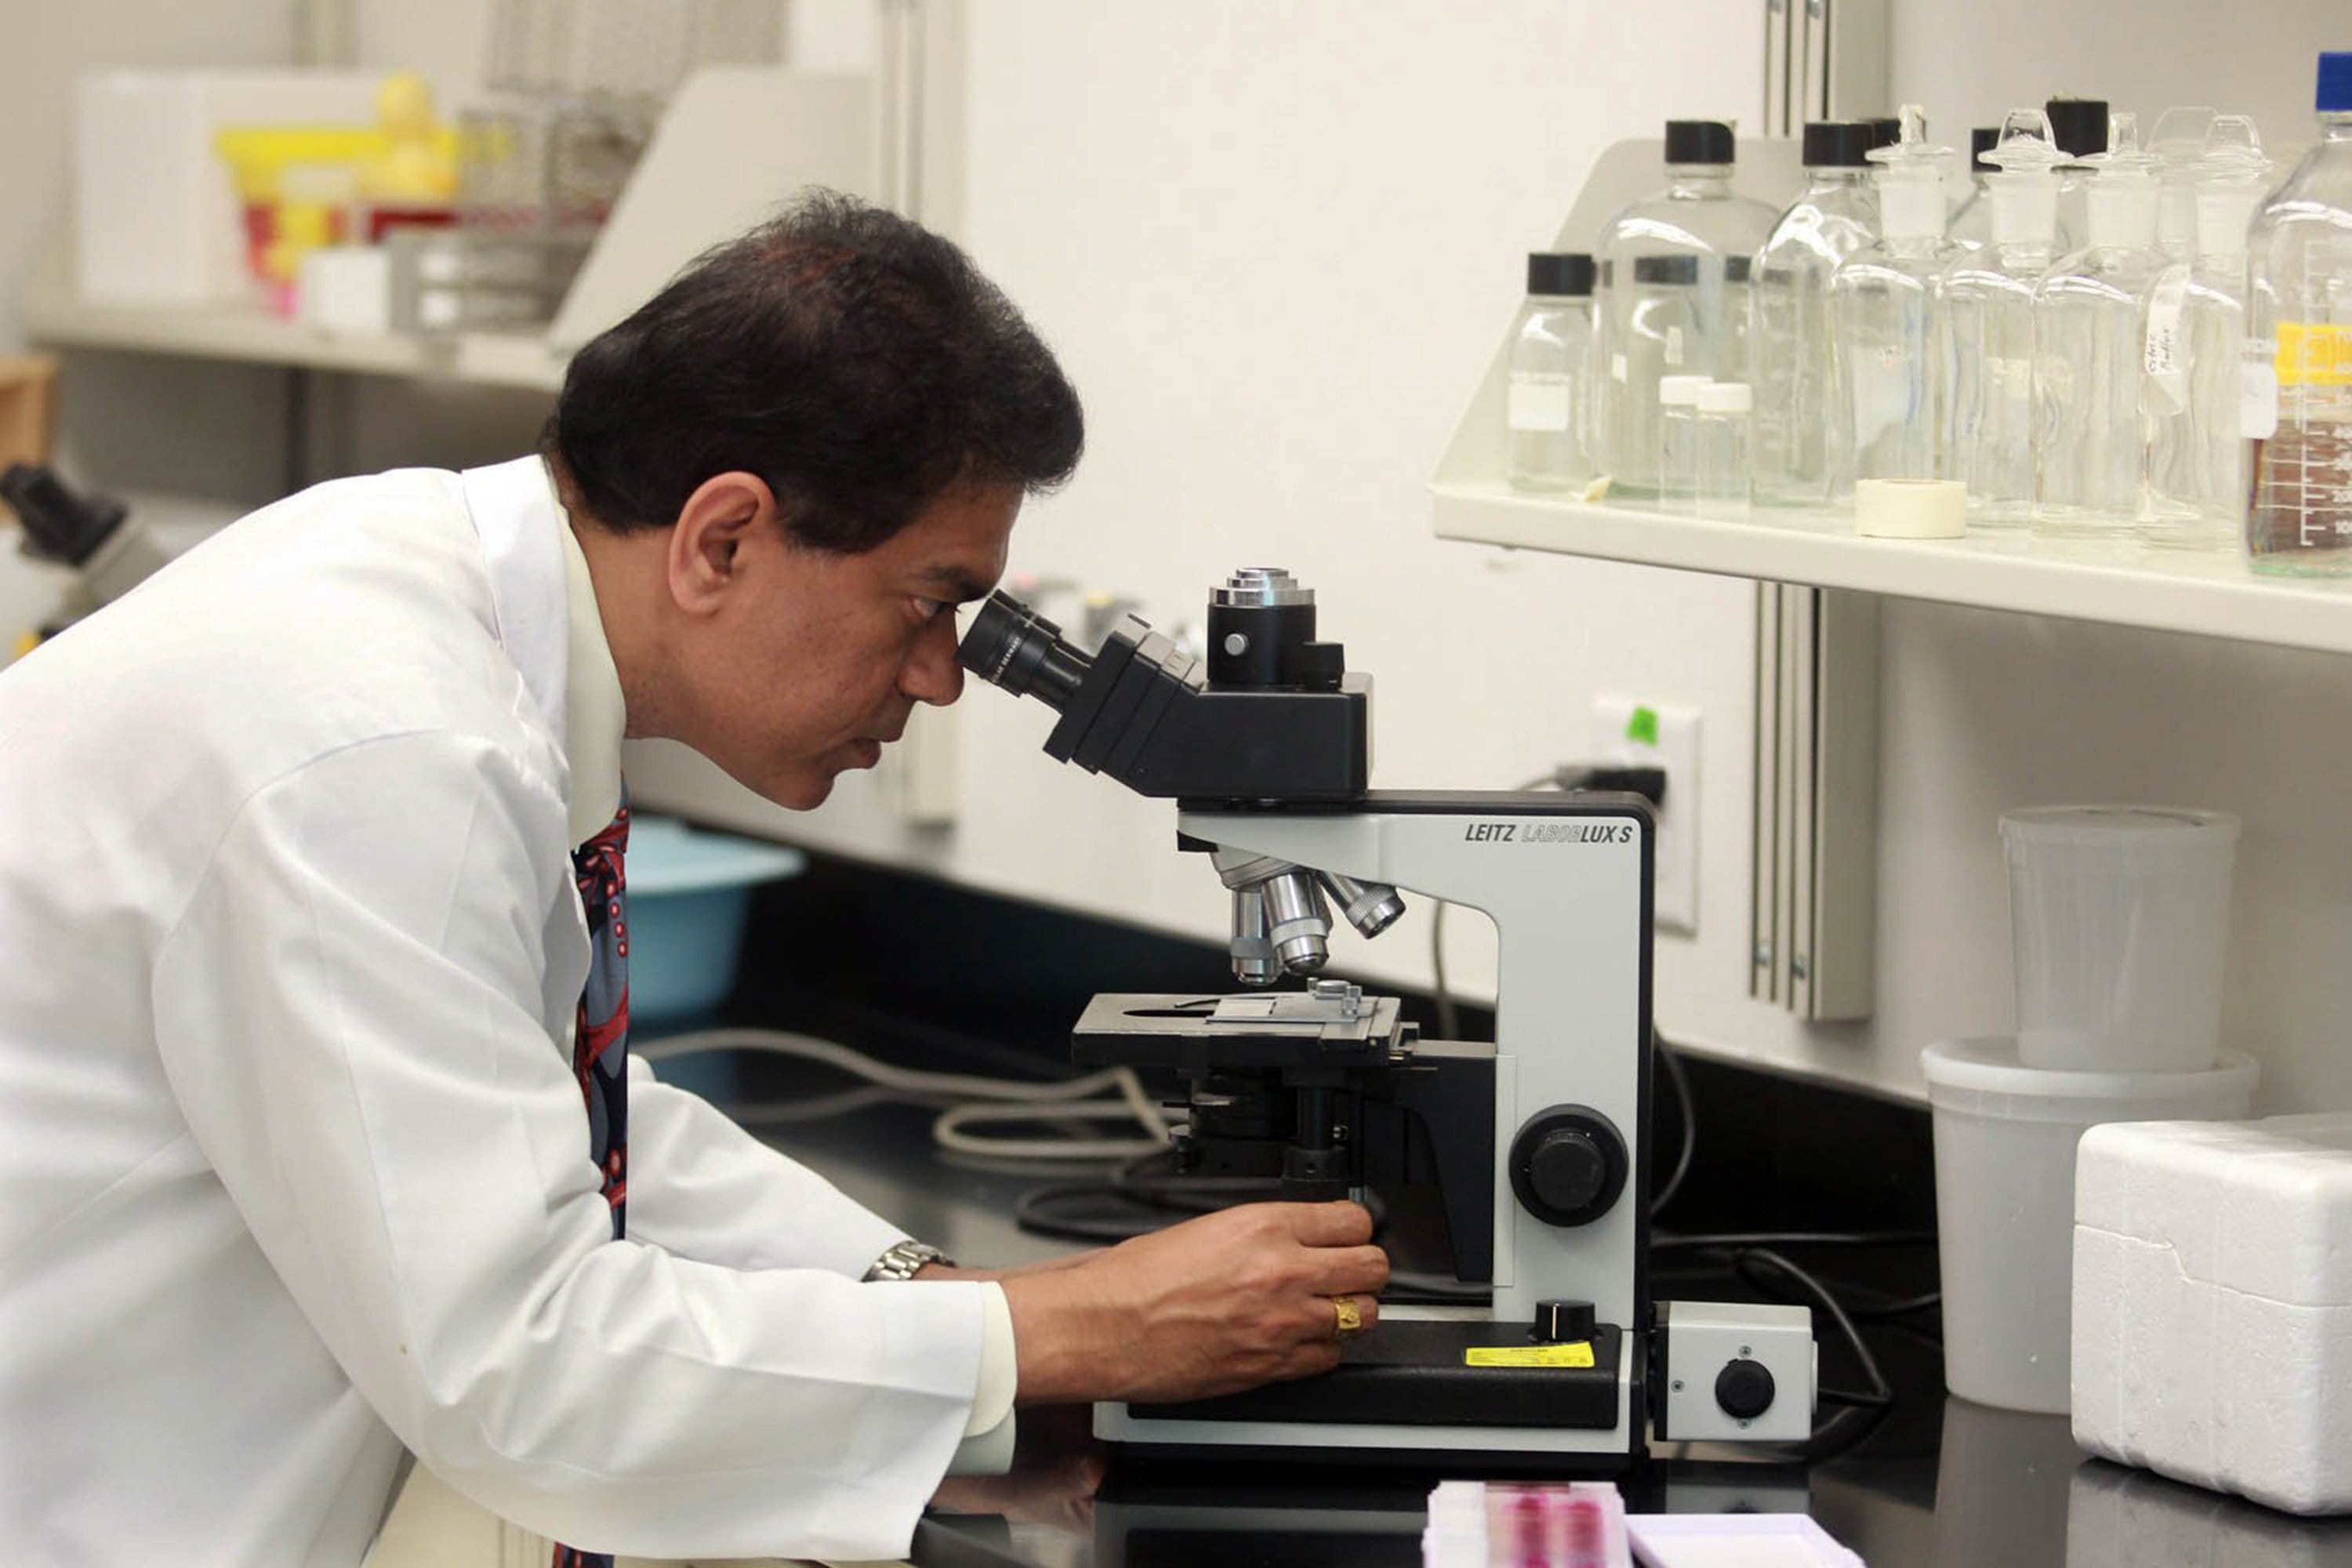 Dr. Dileep Yavagal works in the stem cell stroke basic science lab Aug. 14 at the University of Miami Miller School of Medicine in Miami.